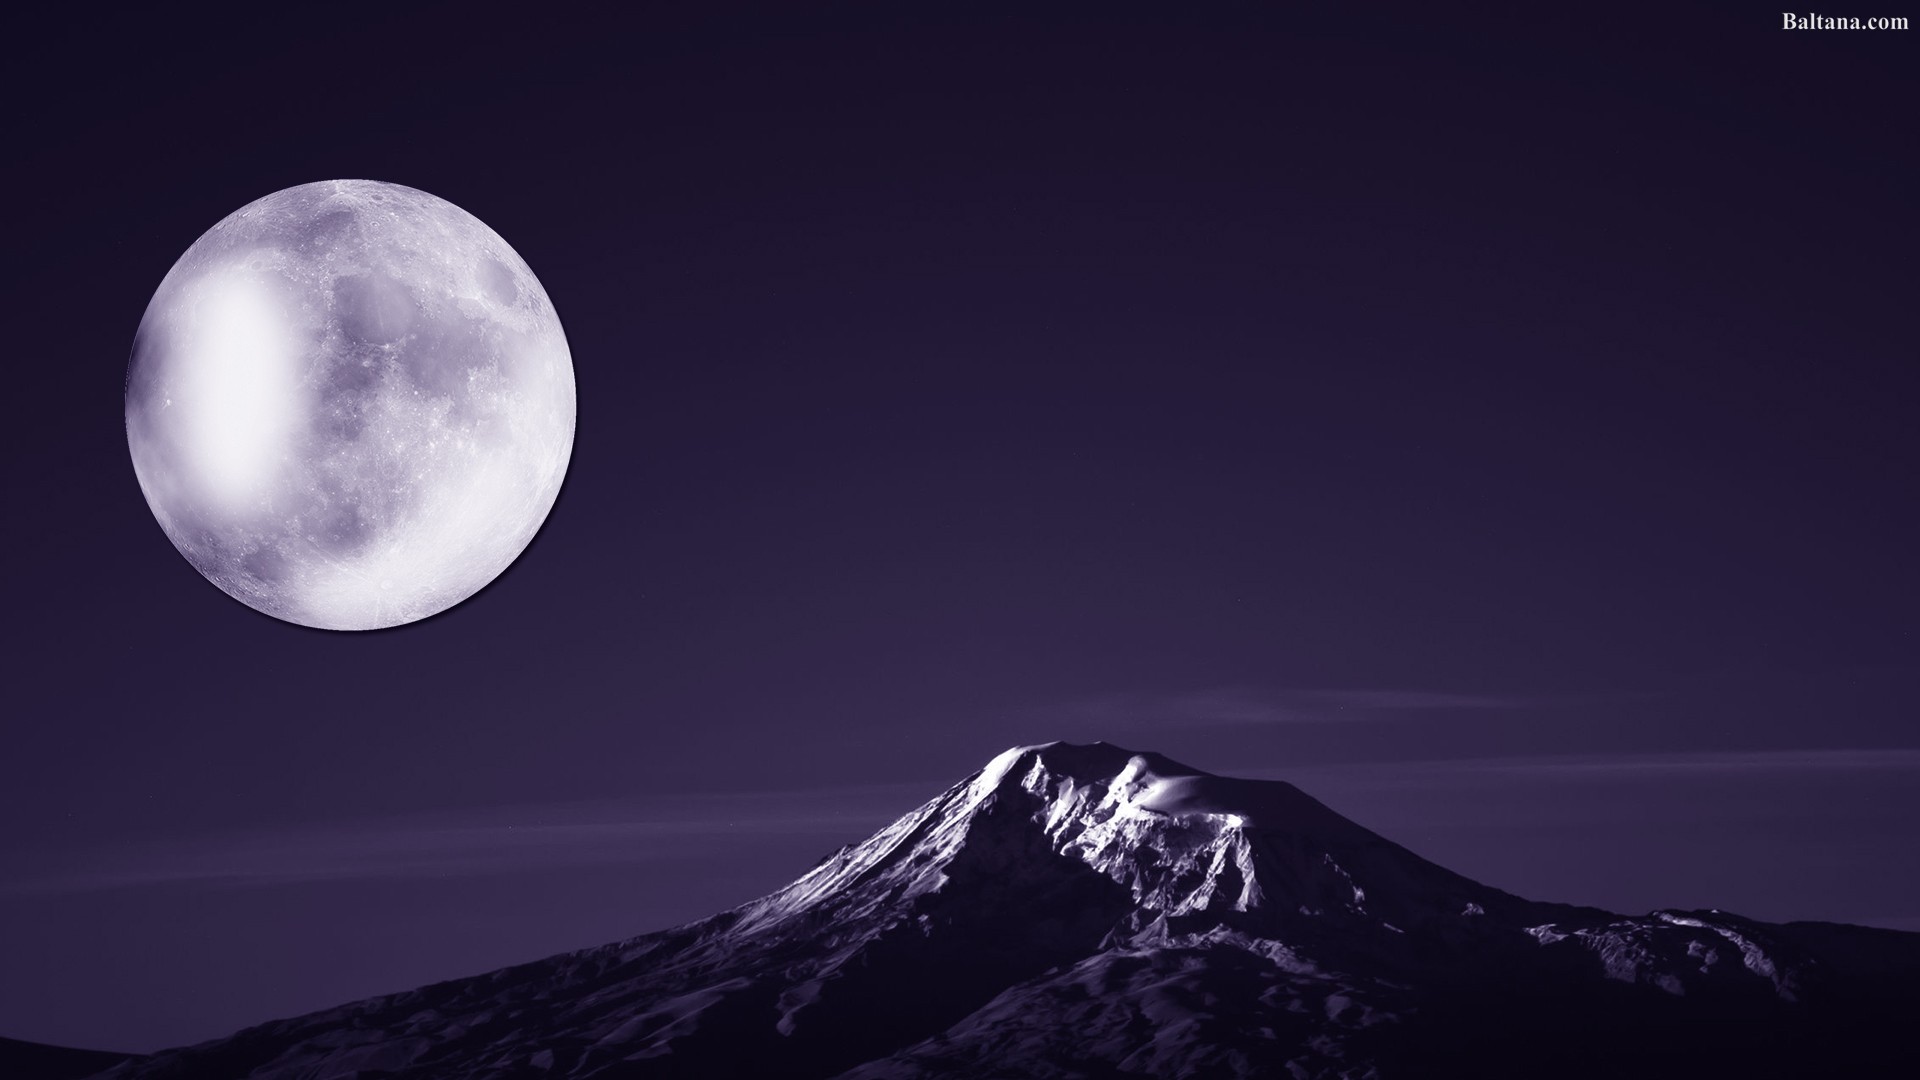 Download free Moon Background Wallpaper 30792 available in different high-q...